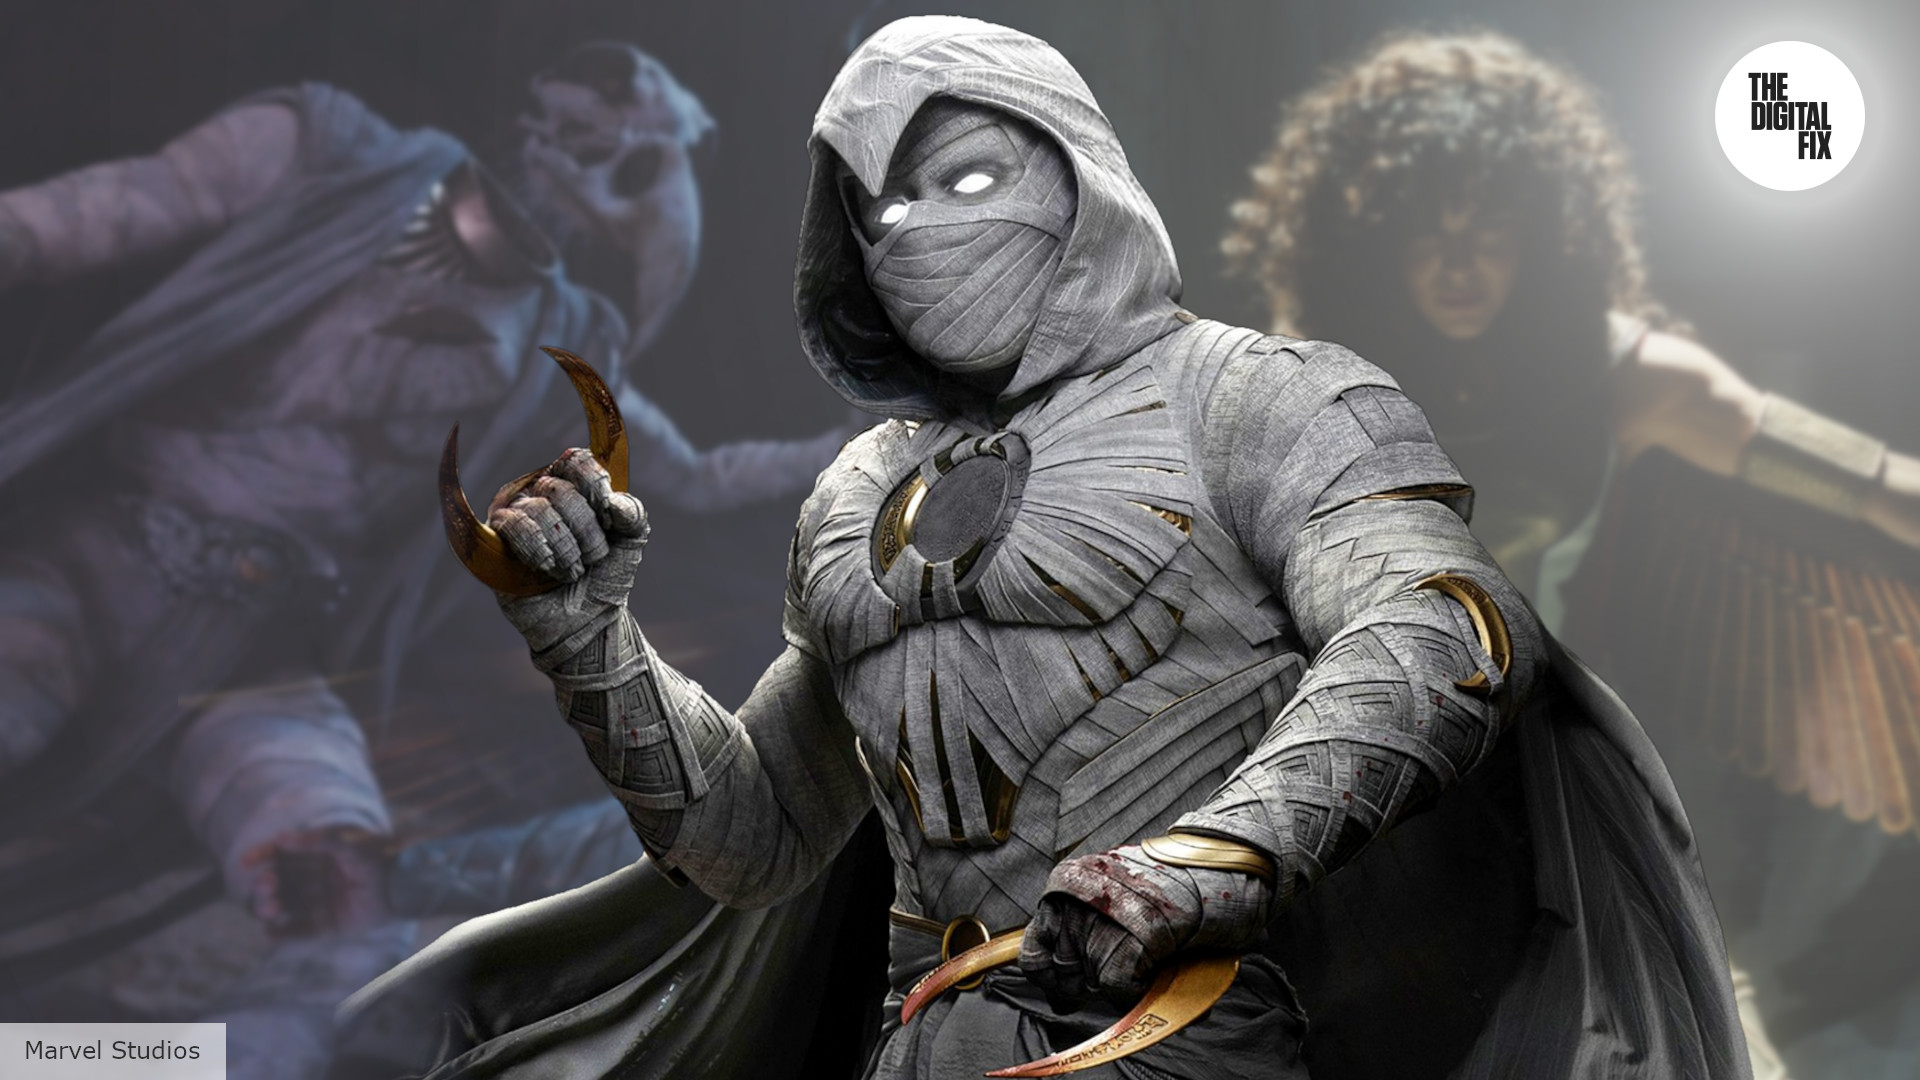 marvel: Moon Knight season 2: Release date prediction, where to watch,  spoilers, and more